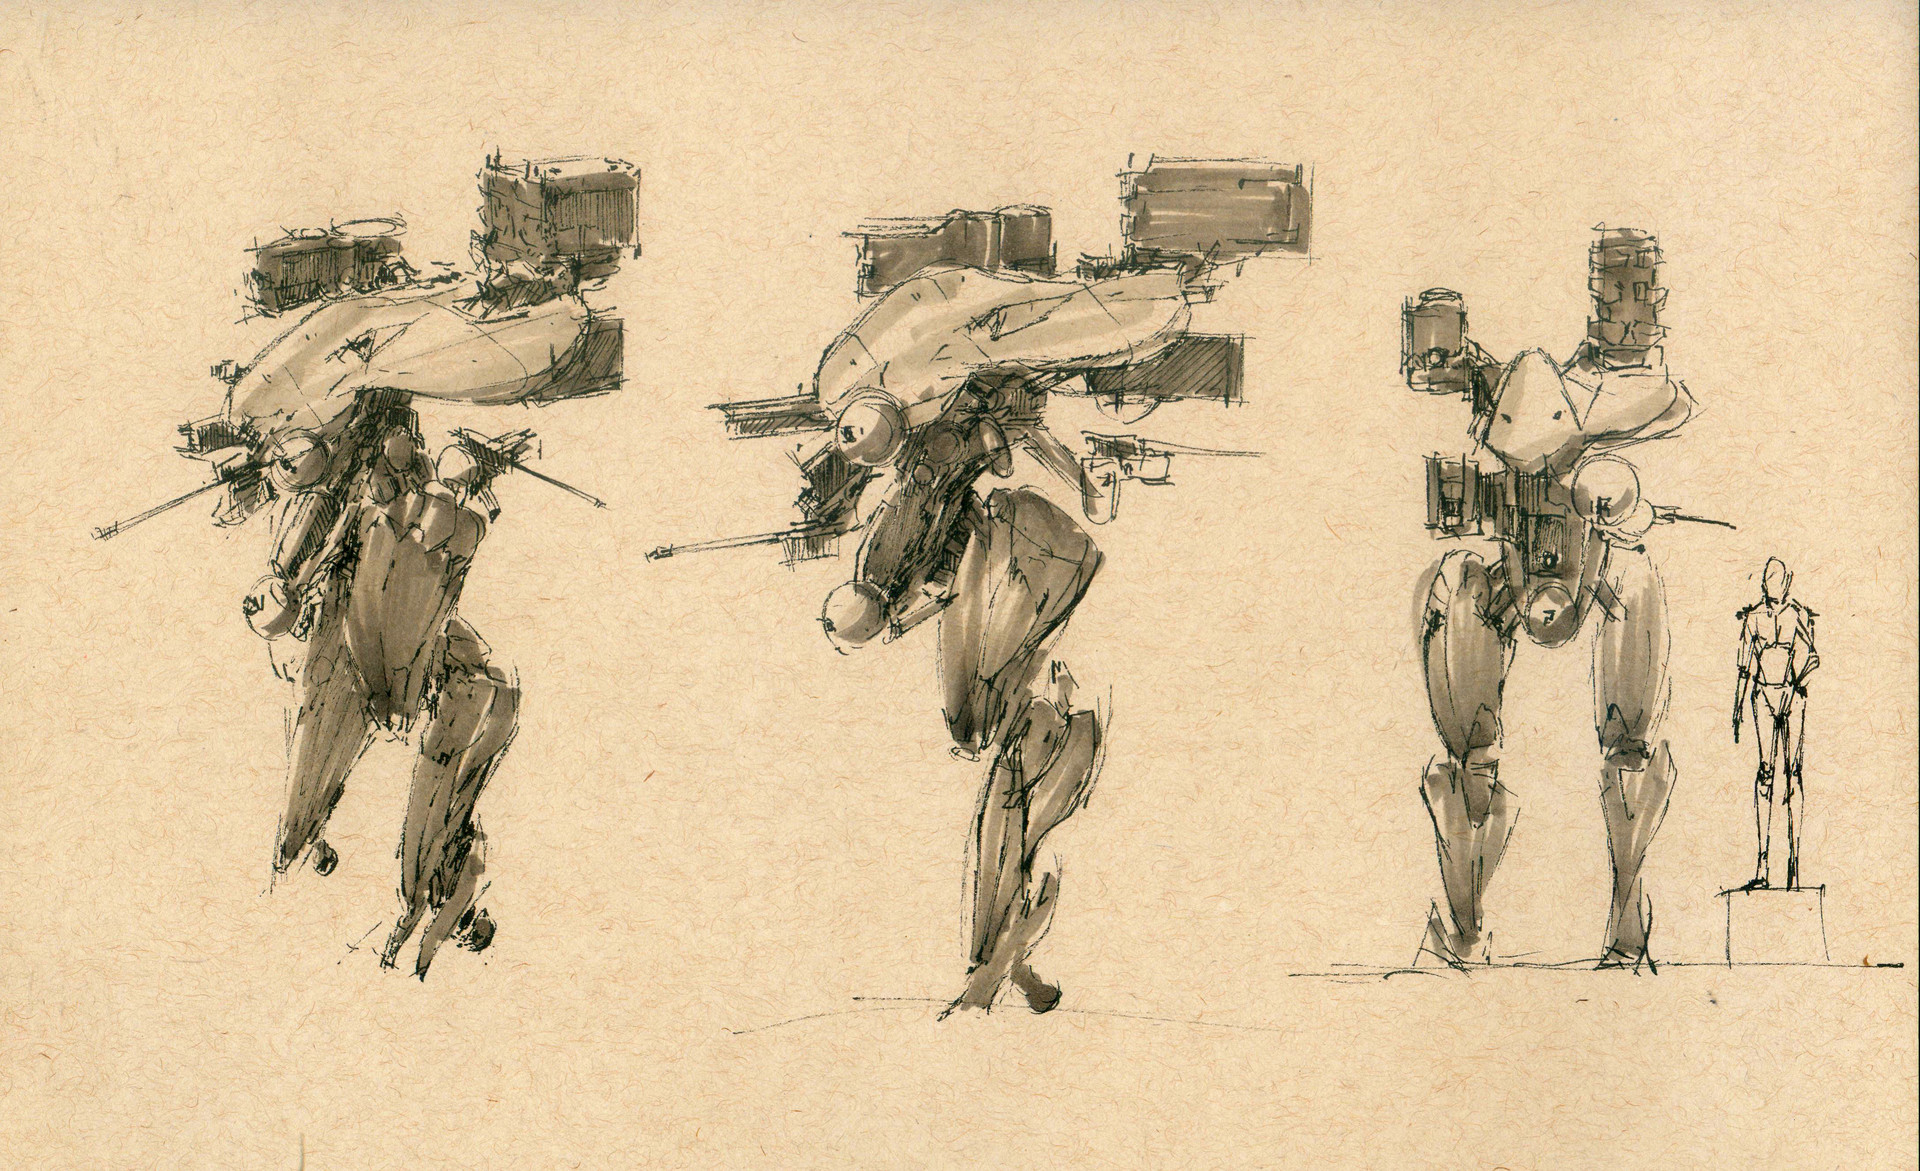 Fine Art: An Old-Timey Guide To Giant Fighting Mechs